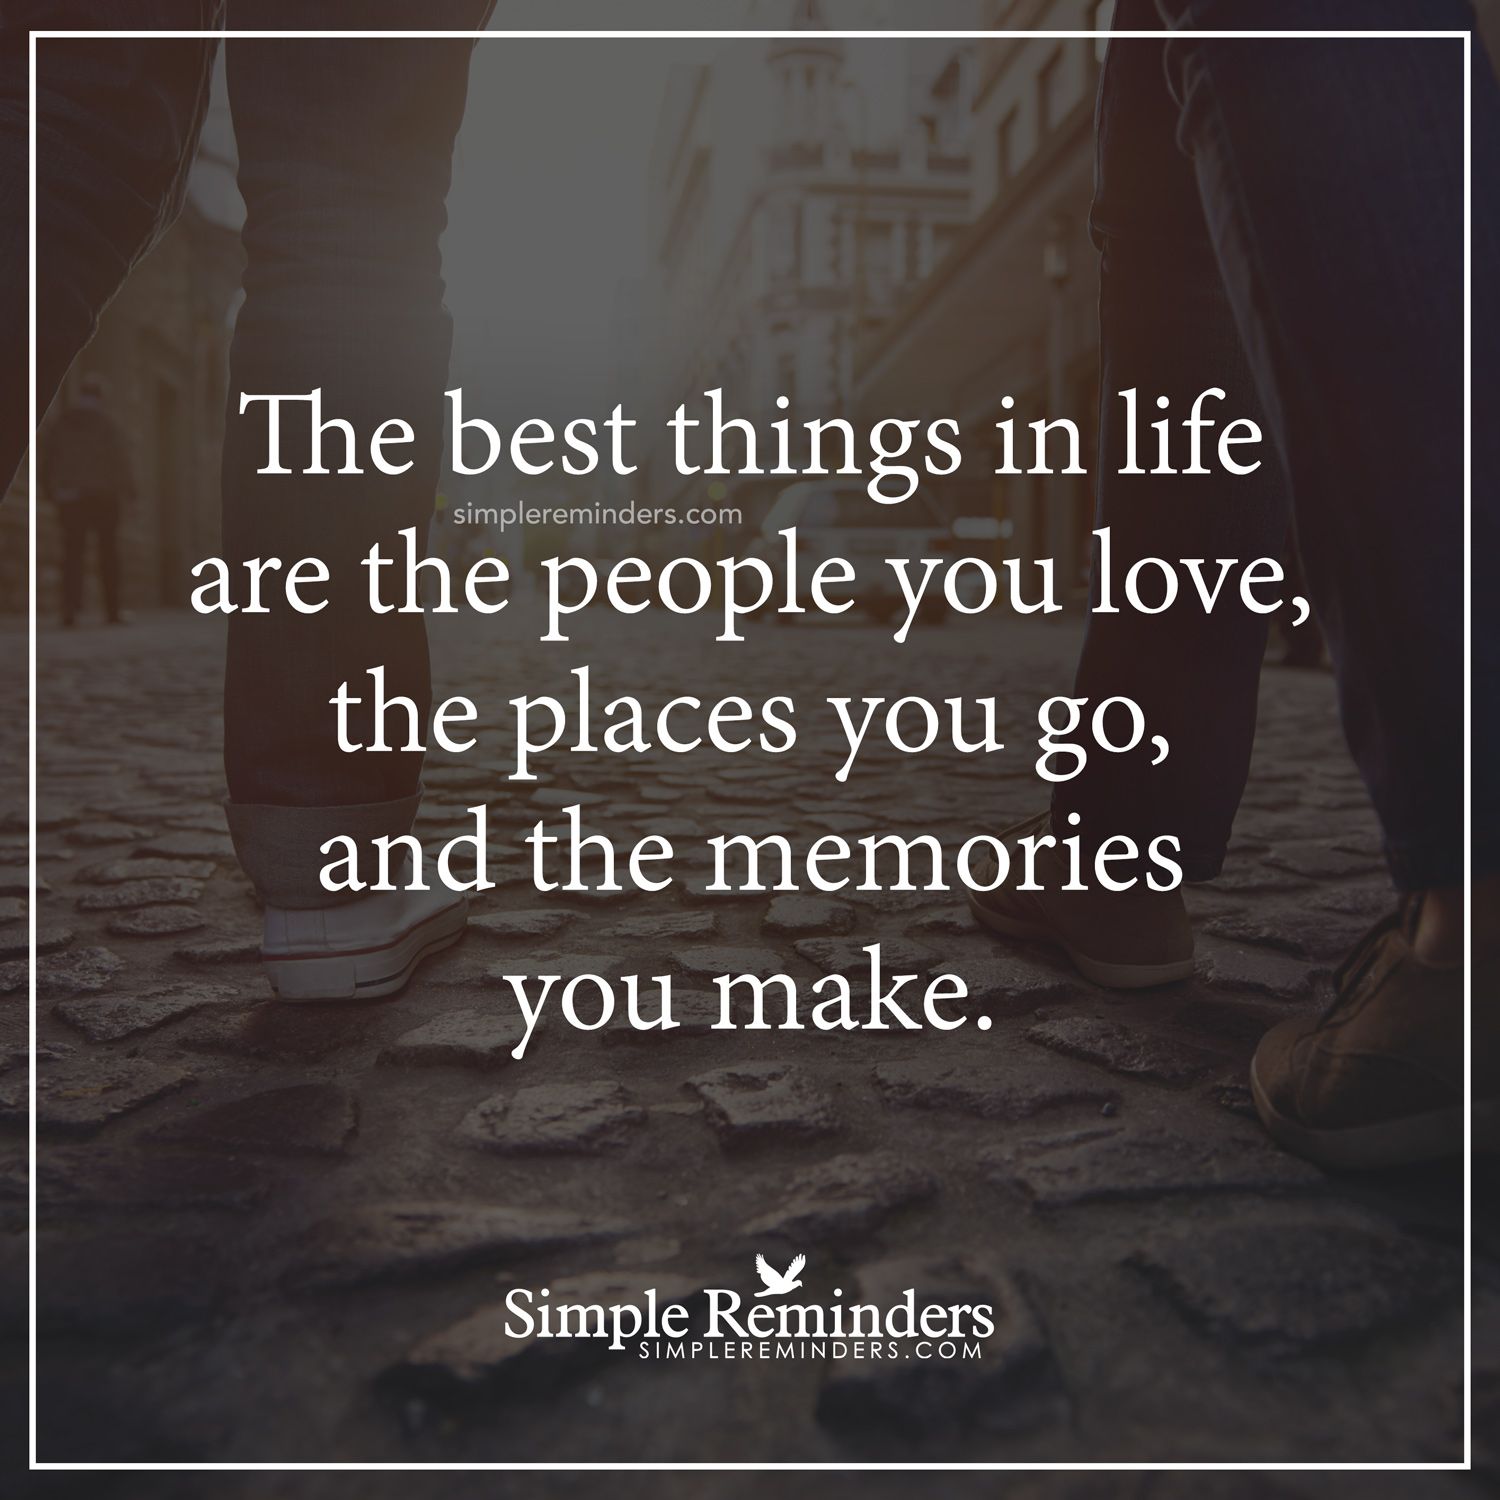 The best things in life The best things in life are the people you ...